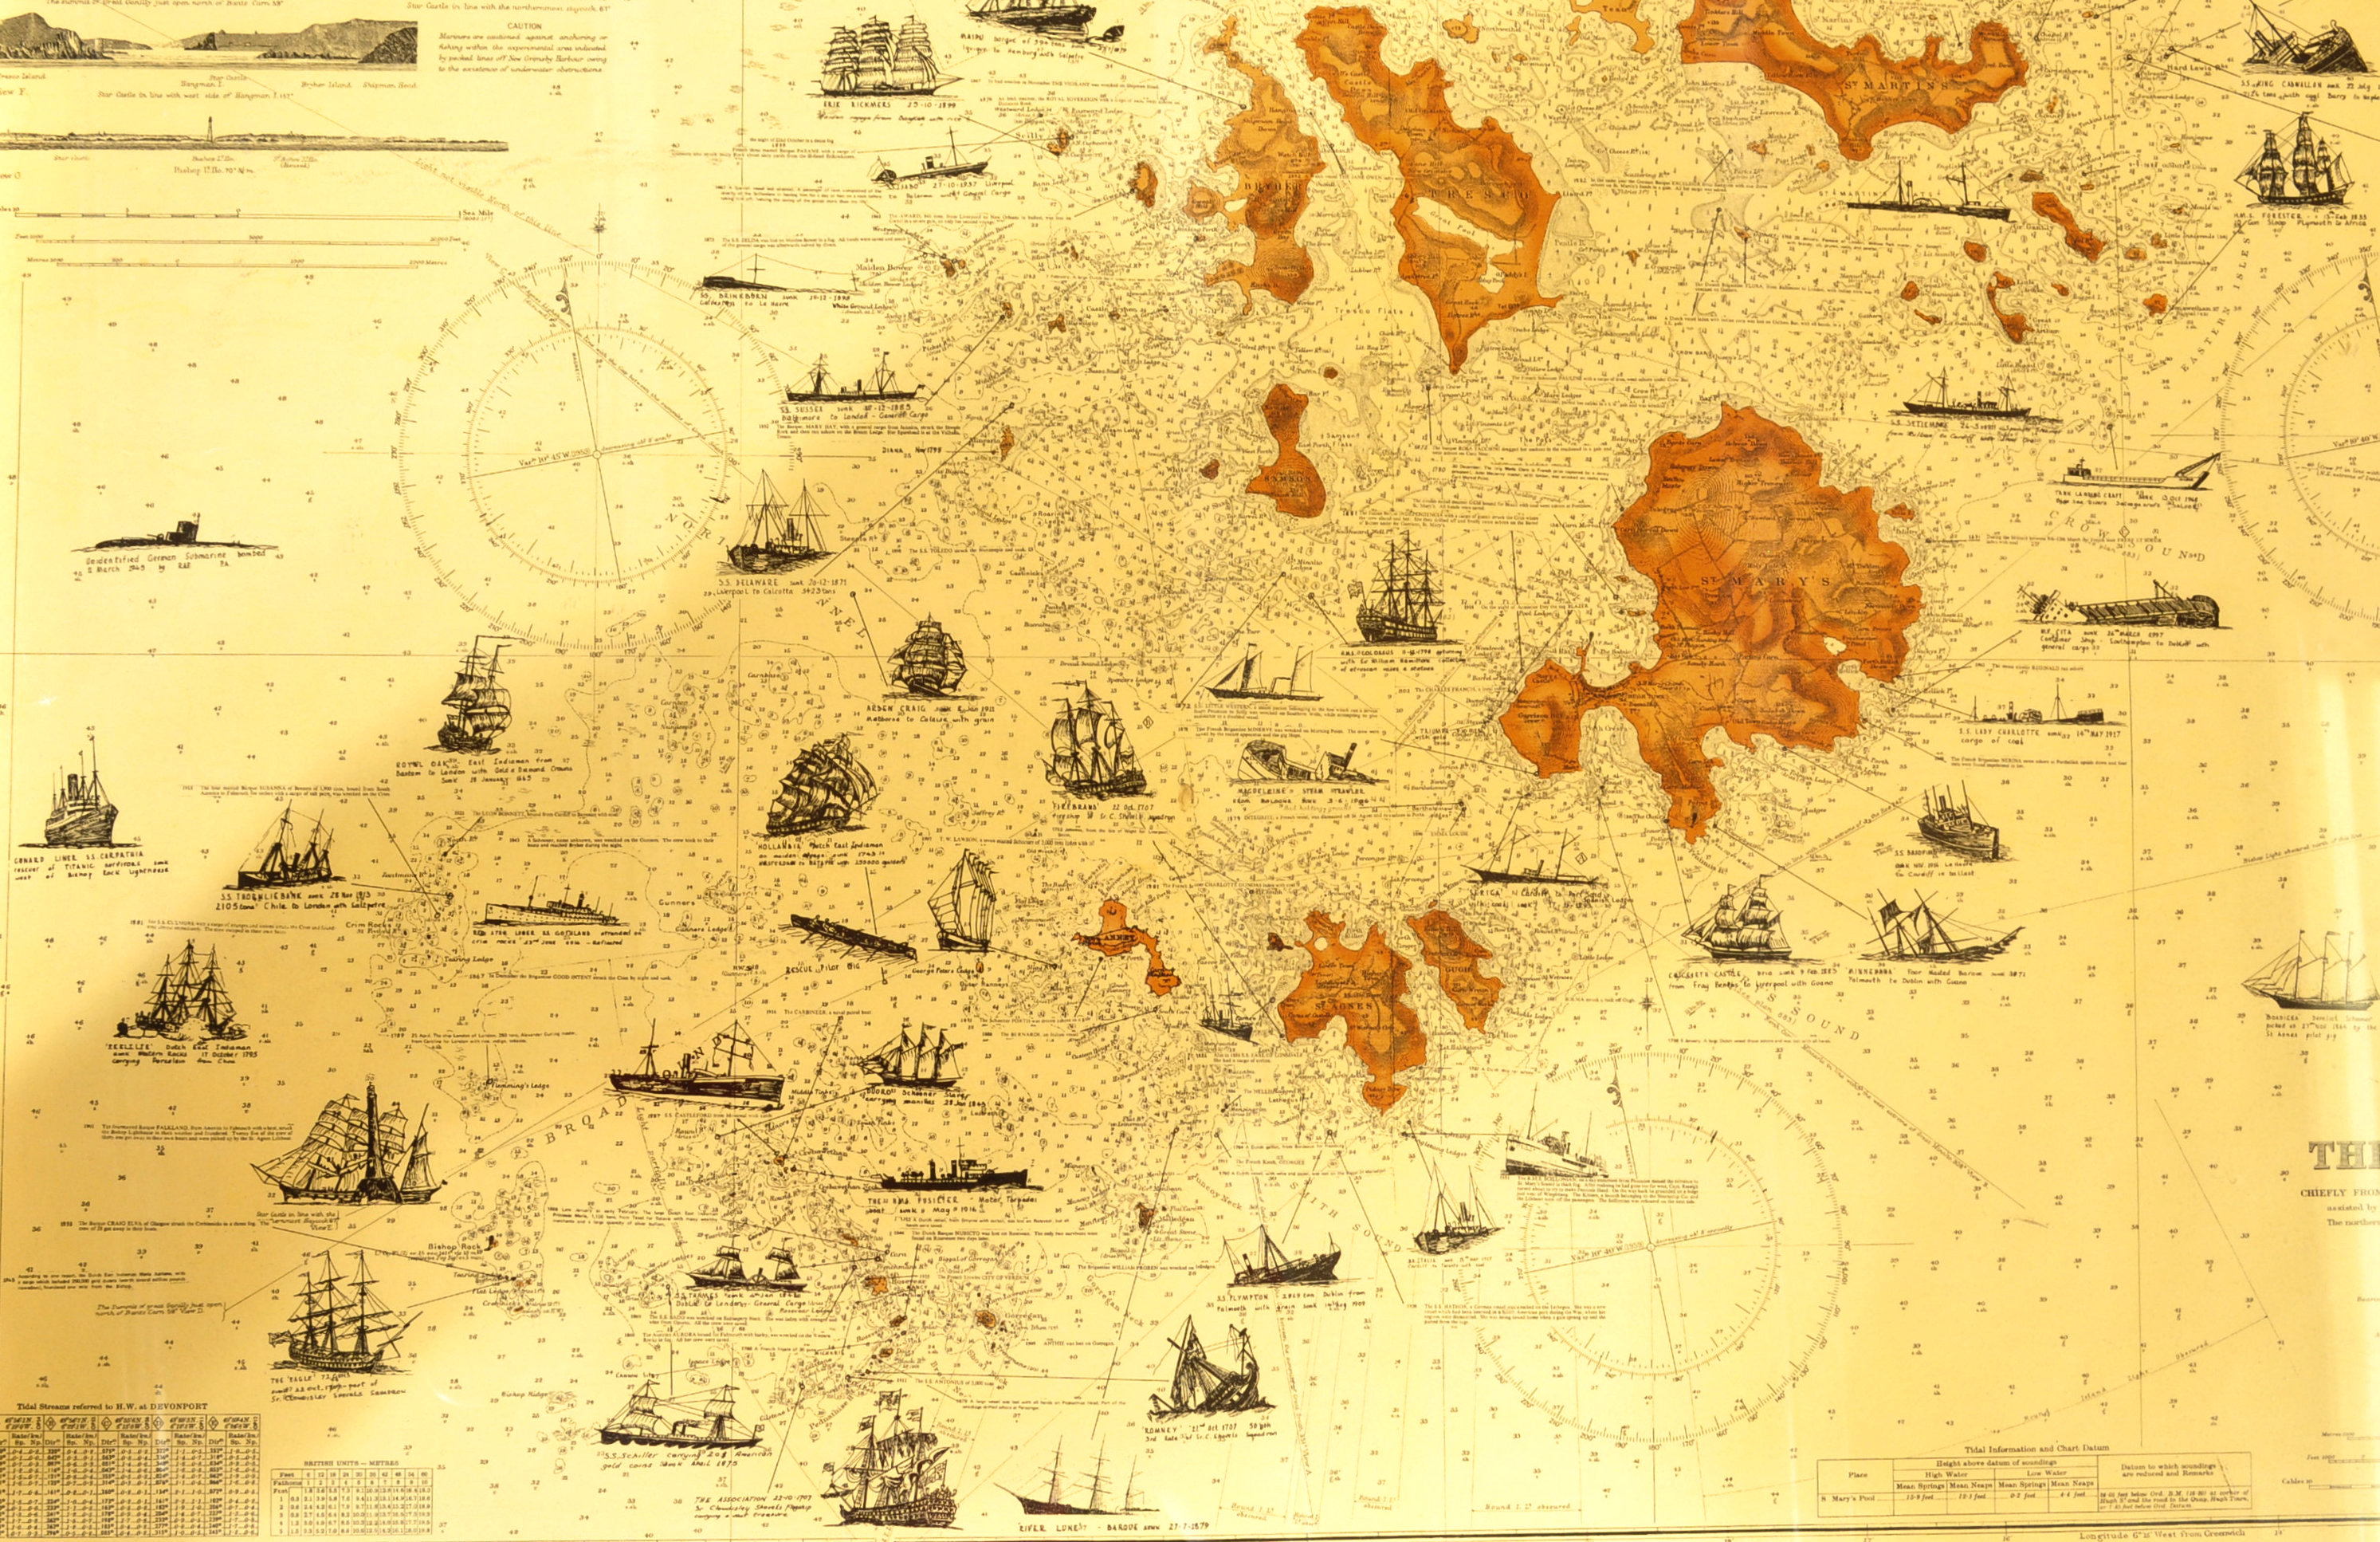 THE SCILLY ISLES - PRINTED SURVEY'S MAP - Image 3 of 5